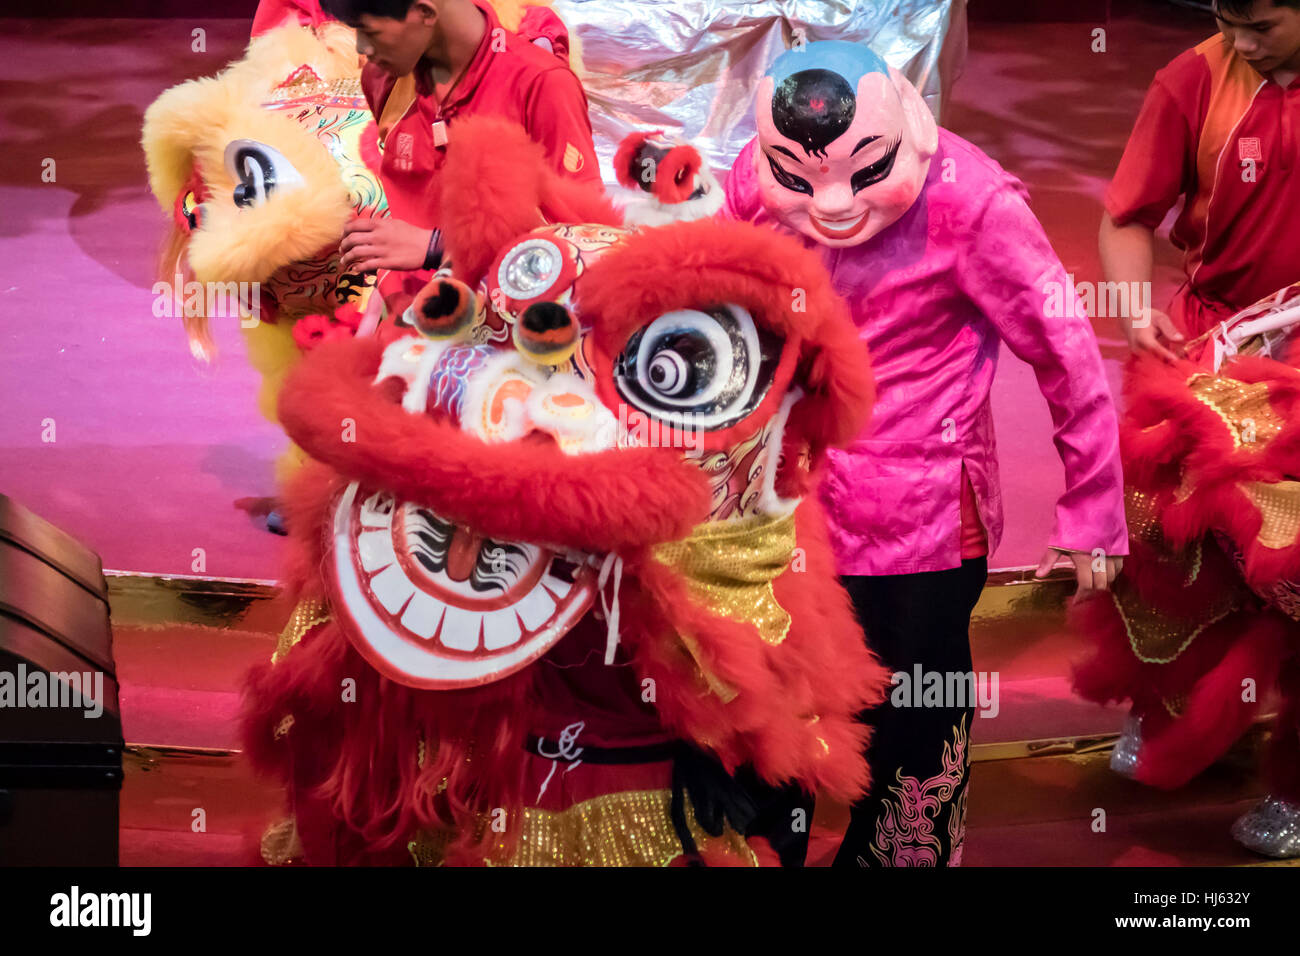 Kuala Lumpur, Malaysia. 21 Jan, 2017. Shopping malls across Kuala Lumpur having acrobatic lion dance performances for the shoppers and tourists to enjoy during the coming Chinese New Year 2017 festival in Kuala Lumpur. © Danny Chan/Alamy Live News. Stock Photo